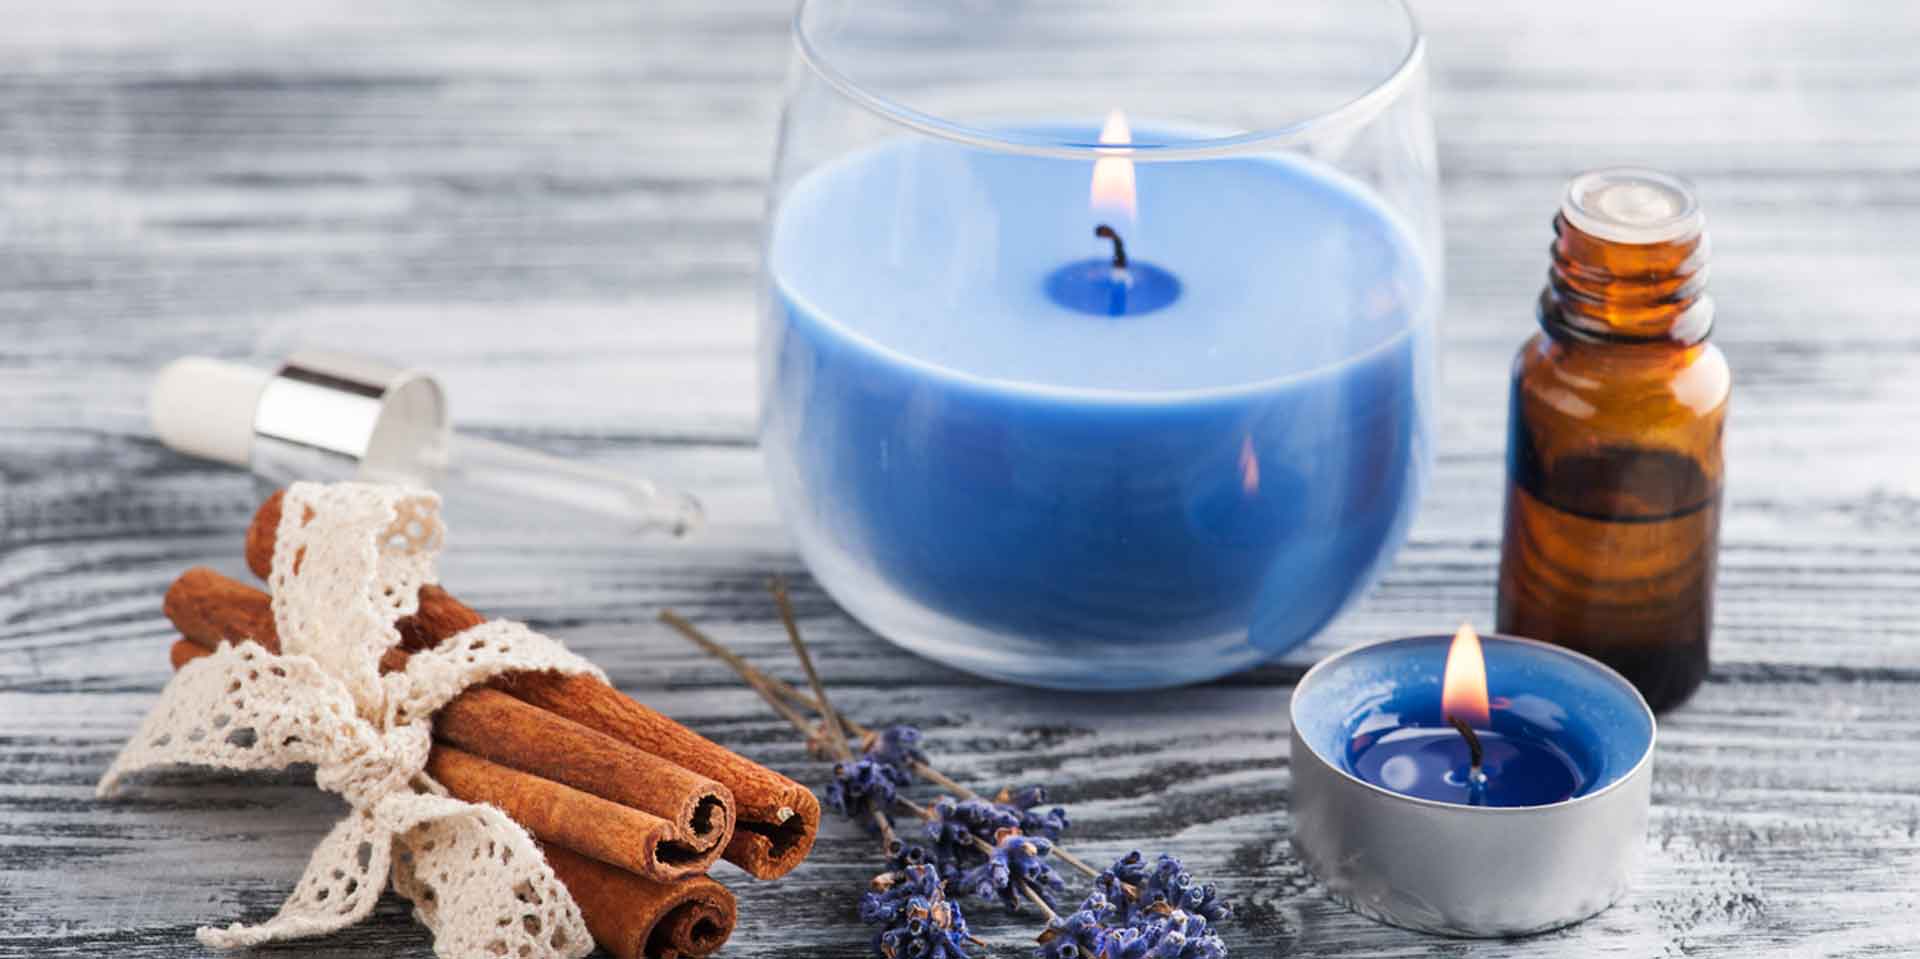 Blue Candle Meanings For Spells | Candle Magic